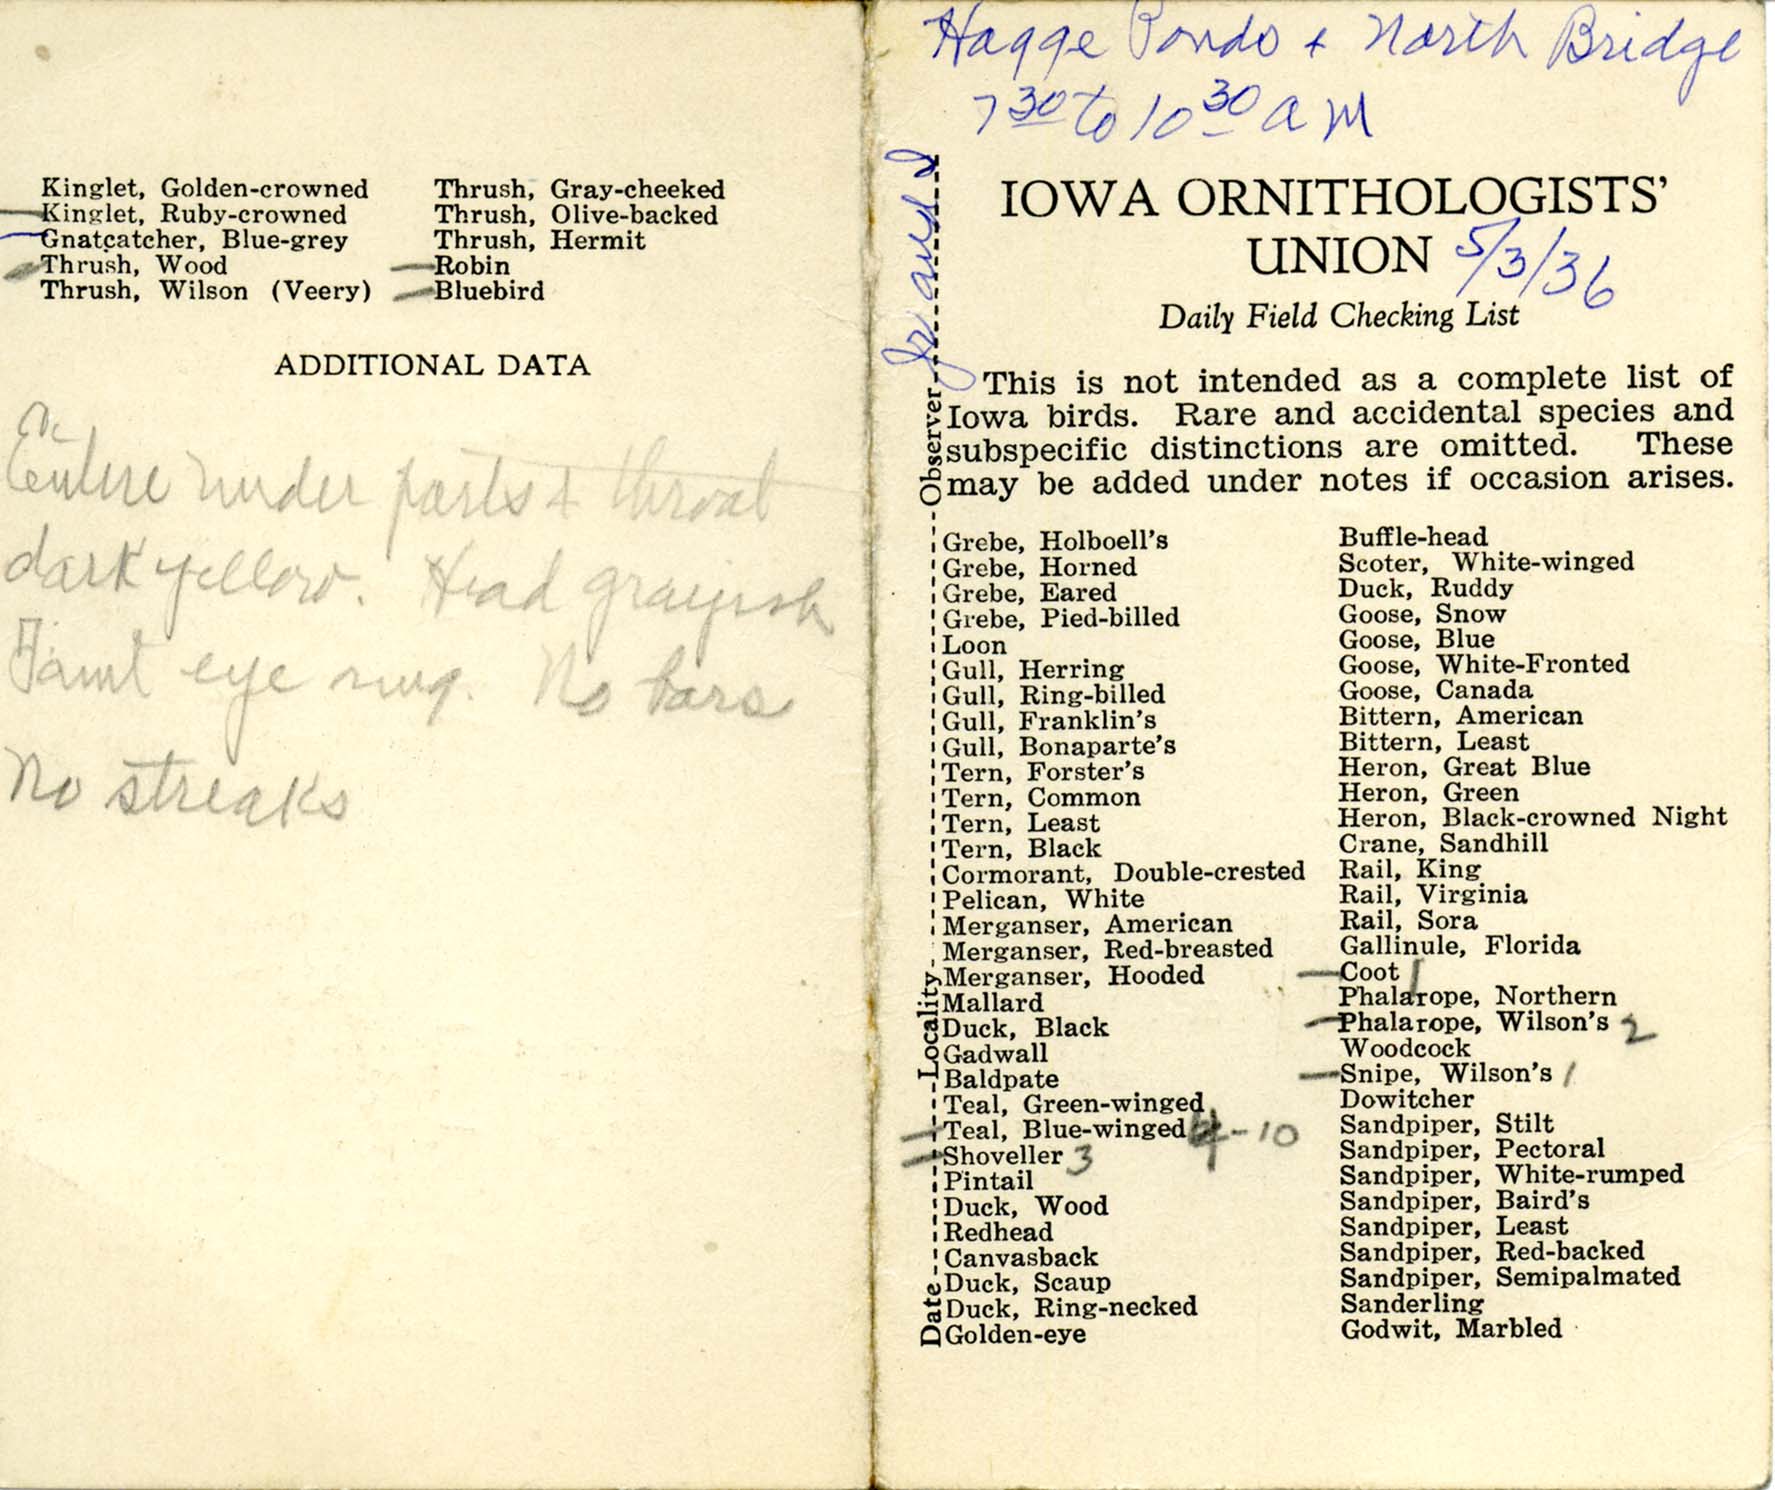 Daily field checking list by Walter Rosene, May 3, 1936